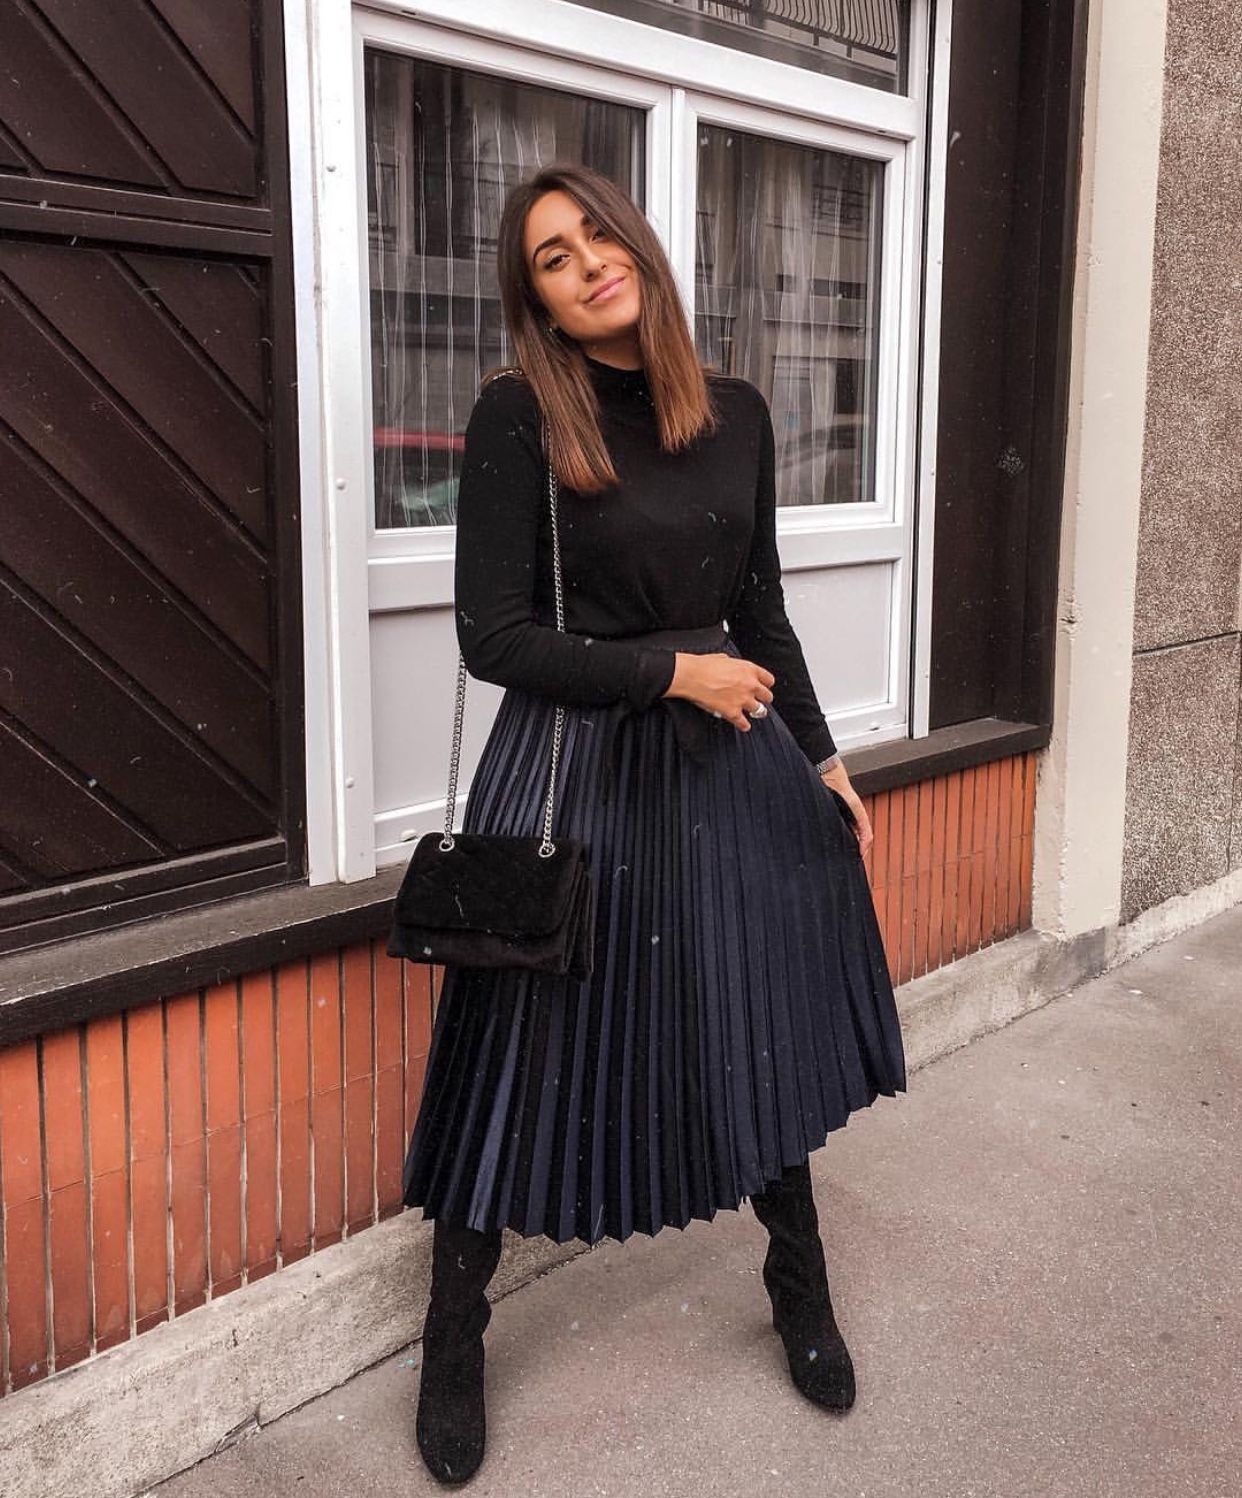 Black Pleated Skirt Outfit Winter Black On Black Outfit Ideas Black